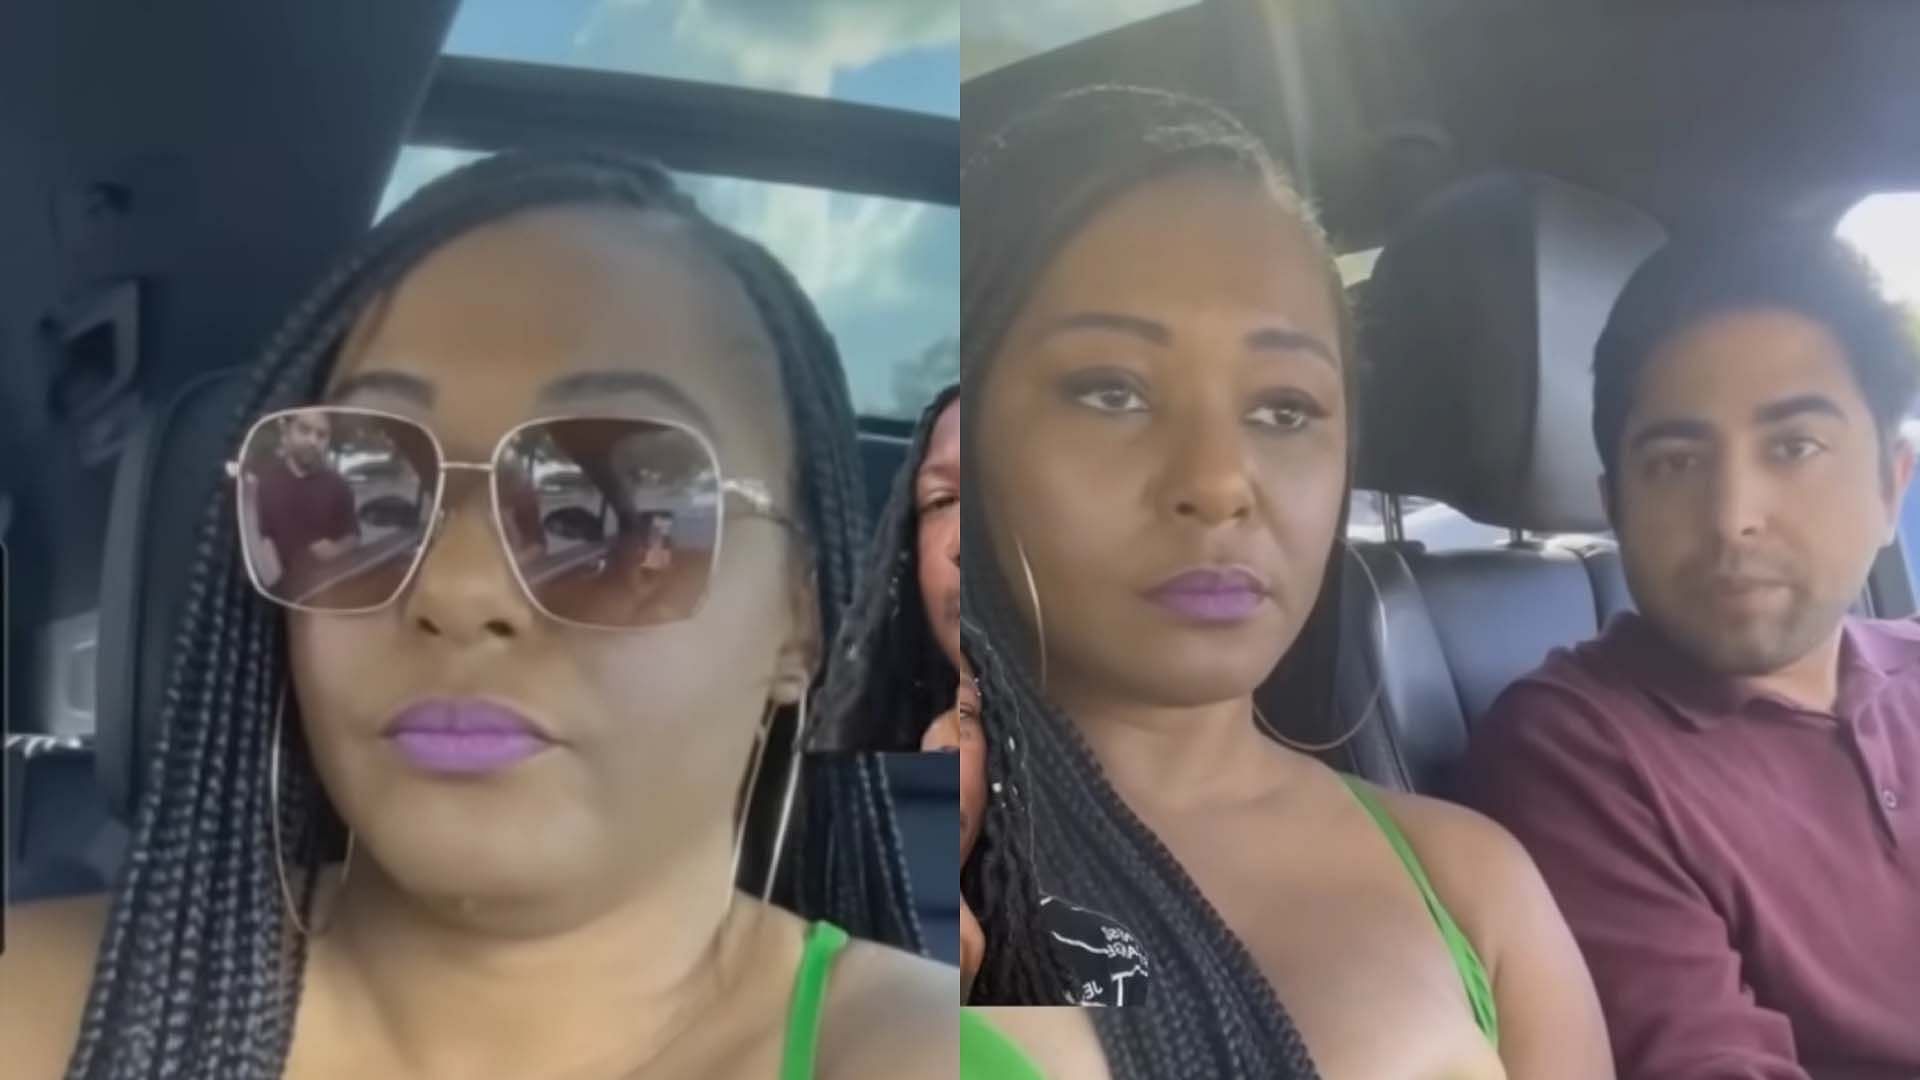 A video showing a woman refusing to go to the Cheesecake factory for the first date goes viral (Image via YouTube/@Derrick Branch)